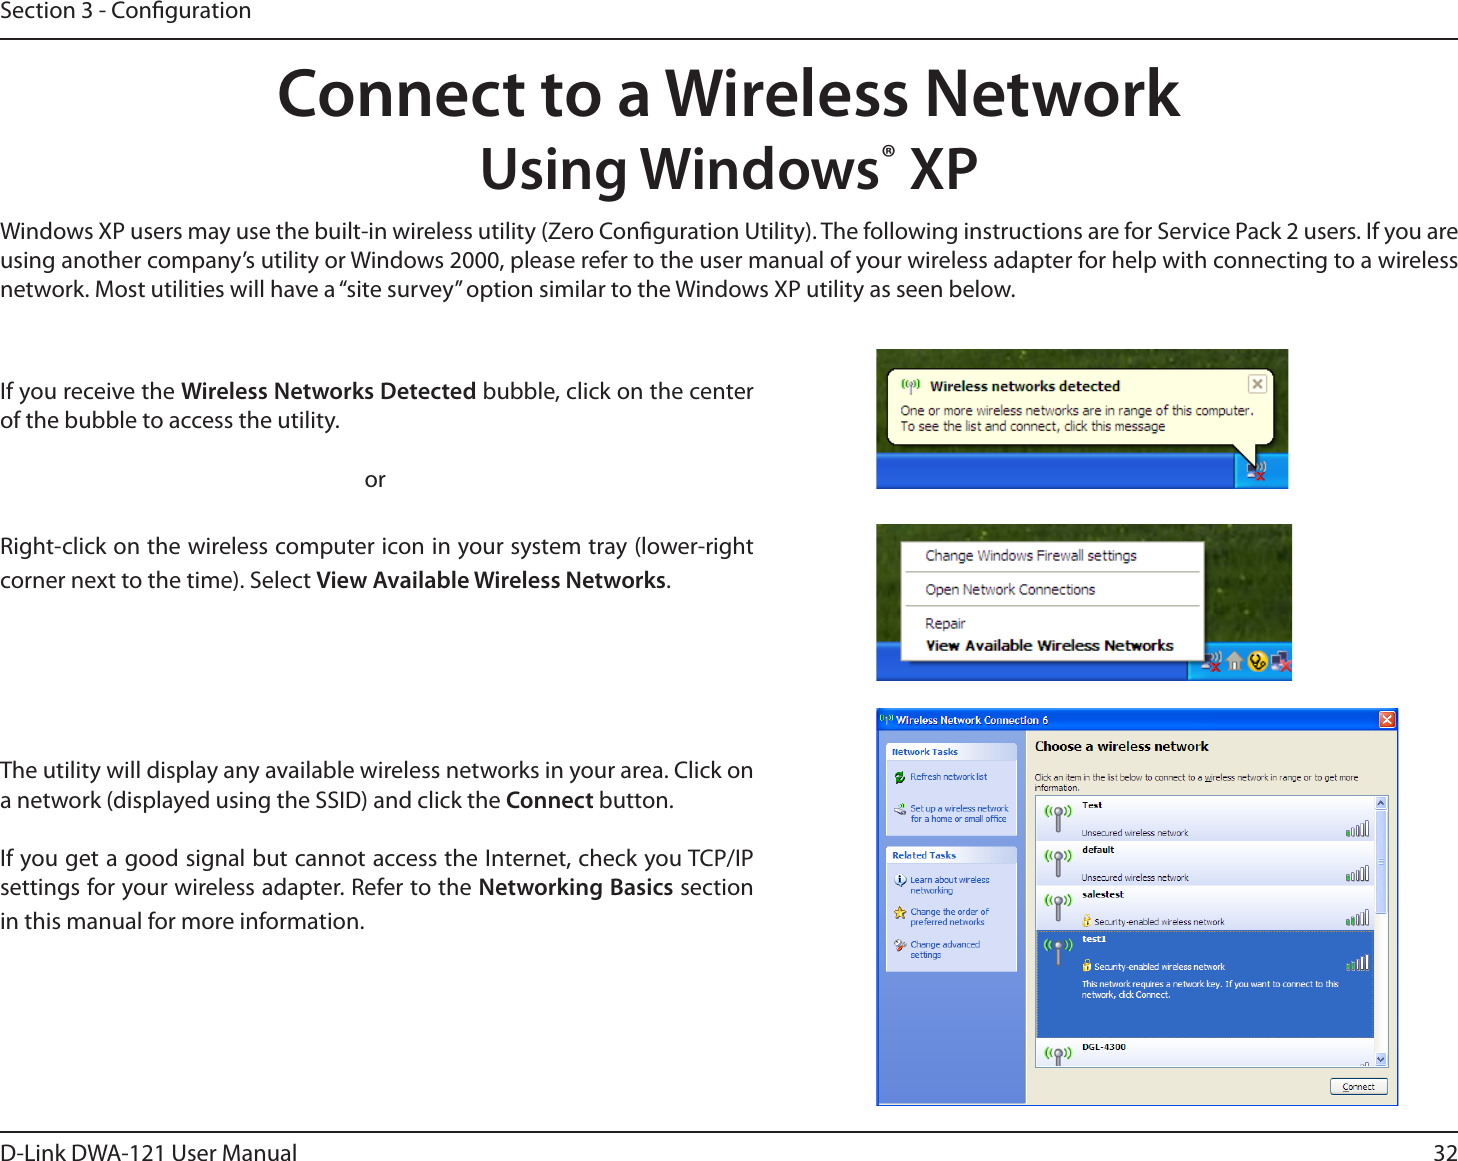 32D-Link DWA-121 User ManualSection 3 - CongurationConnect to a Wireless NetworkUsing Windows® XPWindows XP users may use the built-in wireless utility (Zero Conguration Utility). The following instructions are for Service Pack 2 users. If you are using another company’s utility or Windows 2000, please refer to the user manual of your wireless adapter for help with connecting to a wireless network. Most utilities will have a “site survey” option similar to the Windows XP utility as seen below.Right-click on the wireless computer icon in your system tray (lower-right corner next to the time). Select View Available Wireless Networks.If you receive the Wireless Networks Detected bubble, click on the center of the bubble to access the utility.     orThe utility will display any available wireless networks in your area. Click on a network (displayed using the SSID) and click the Connect button.If you get a good signal but cannot access the Internet, check you TCP/IP settings for your wireless adapter. Refer to the Networking Basics section in this manual for more information.